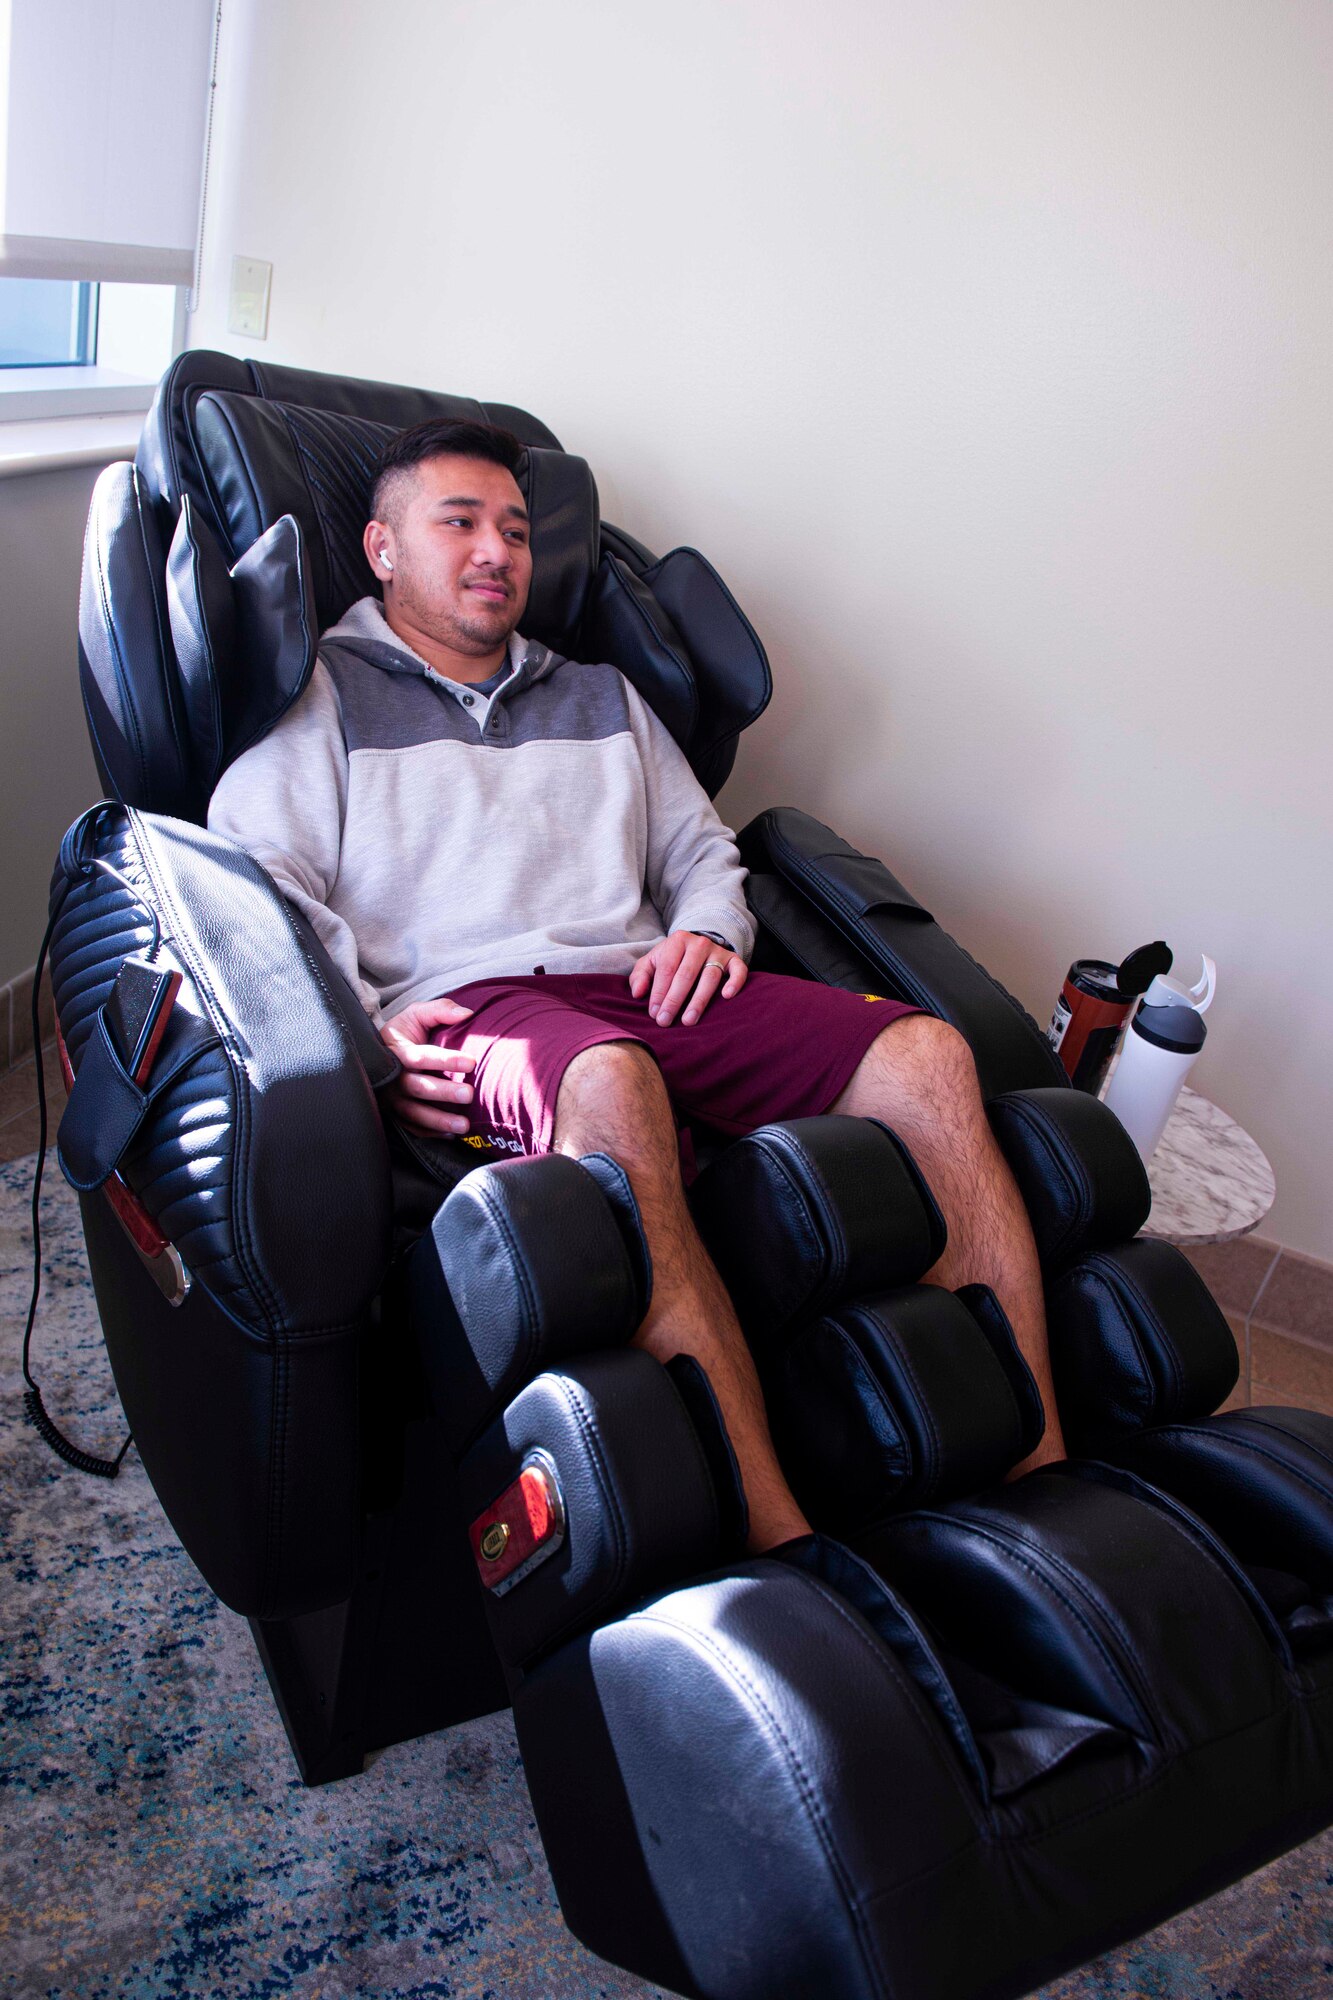 Tim Nguyen, 934 AW Bioenvironmental Engineering Flight industrial hygienist, uses a massage chair during a work break at the new wellness center at the Minneapolis-St. Paul Air Reserve Station, Minnesota on Oct. 5, 2022. (U.S. Air Force photo by Chris Farley) The wellness center is for base personnel to use for de-stressing from work tension or for simply relaxing in a comfortable environment.